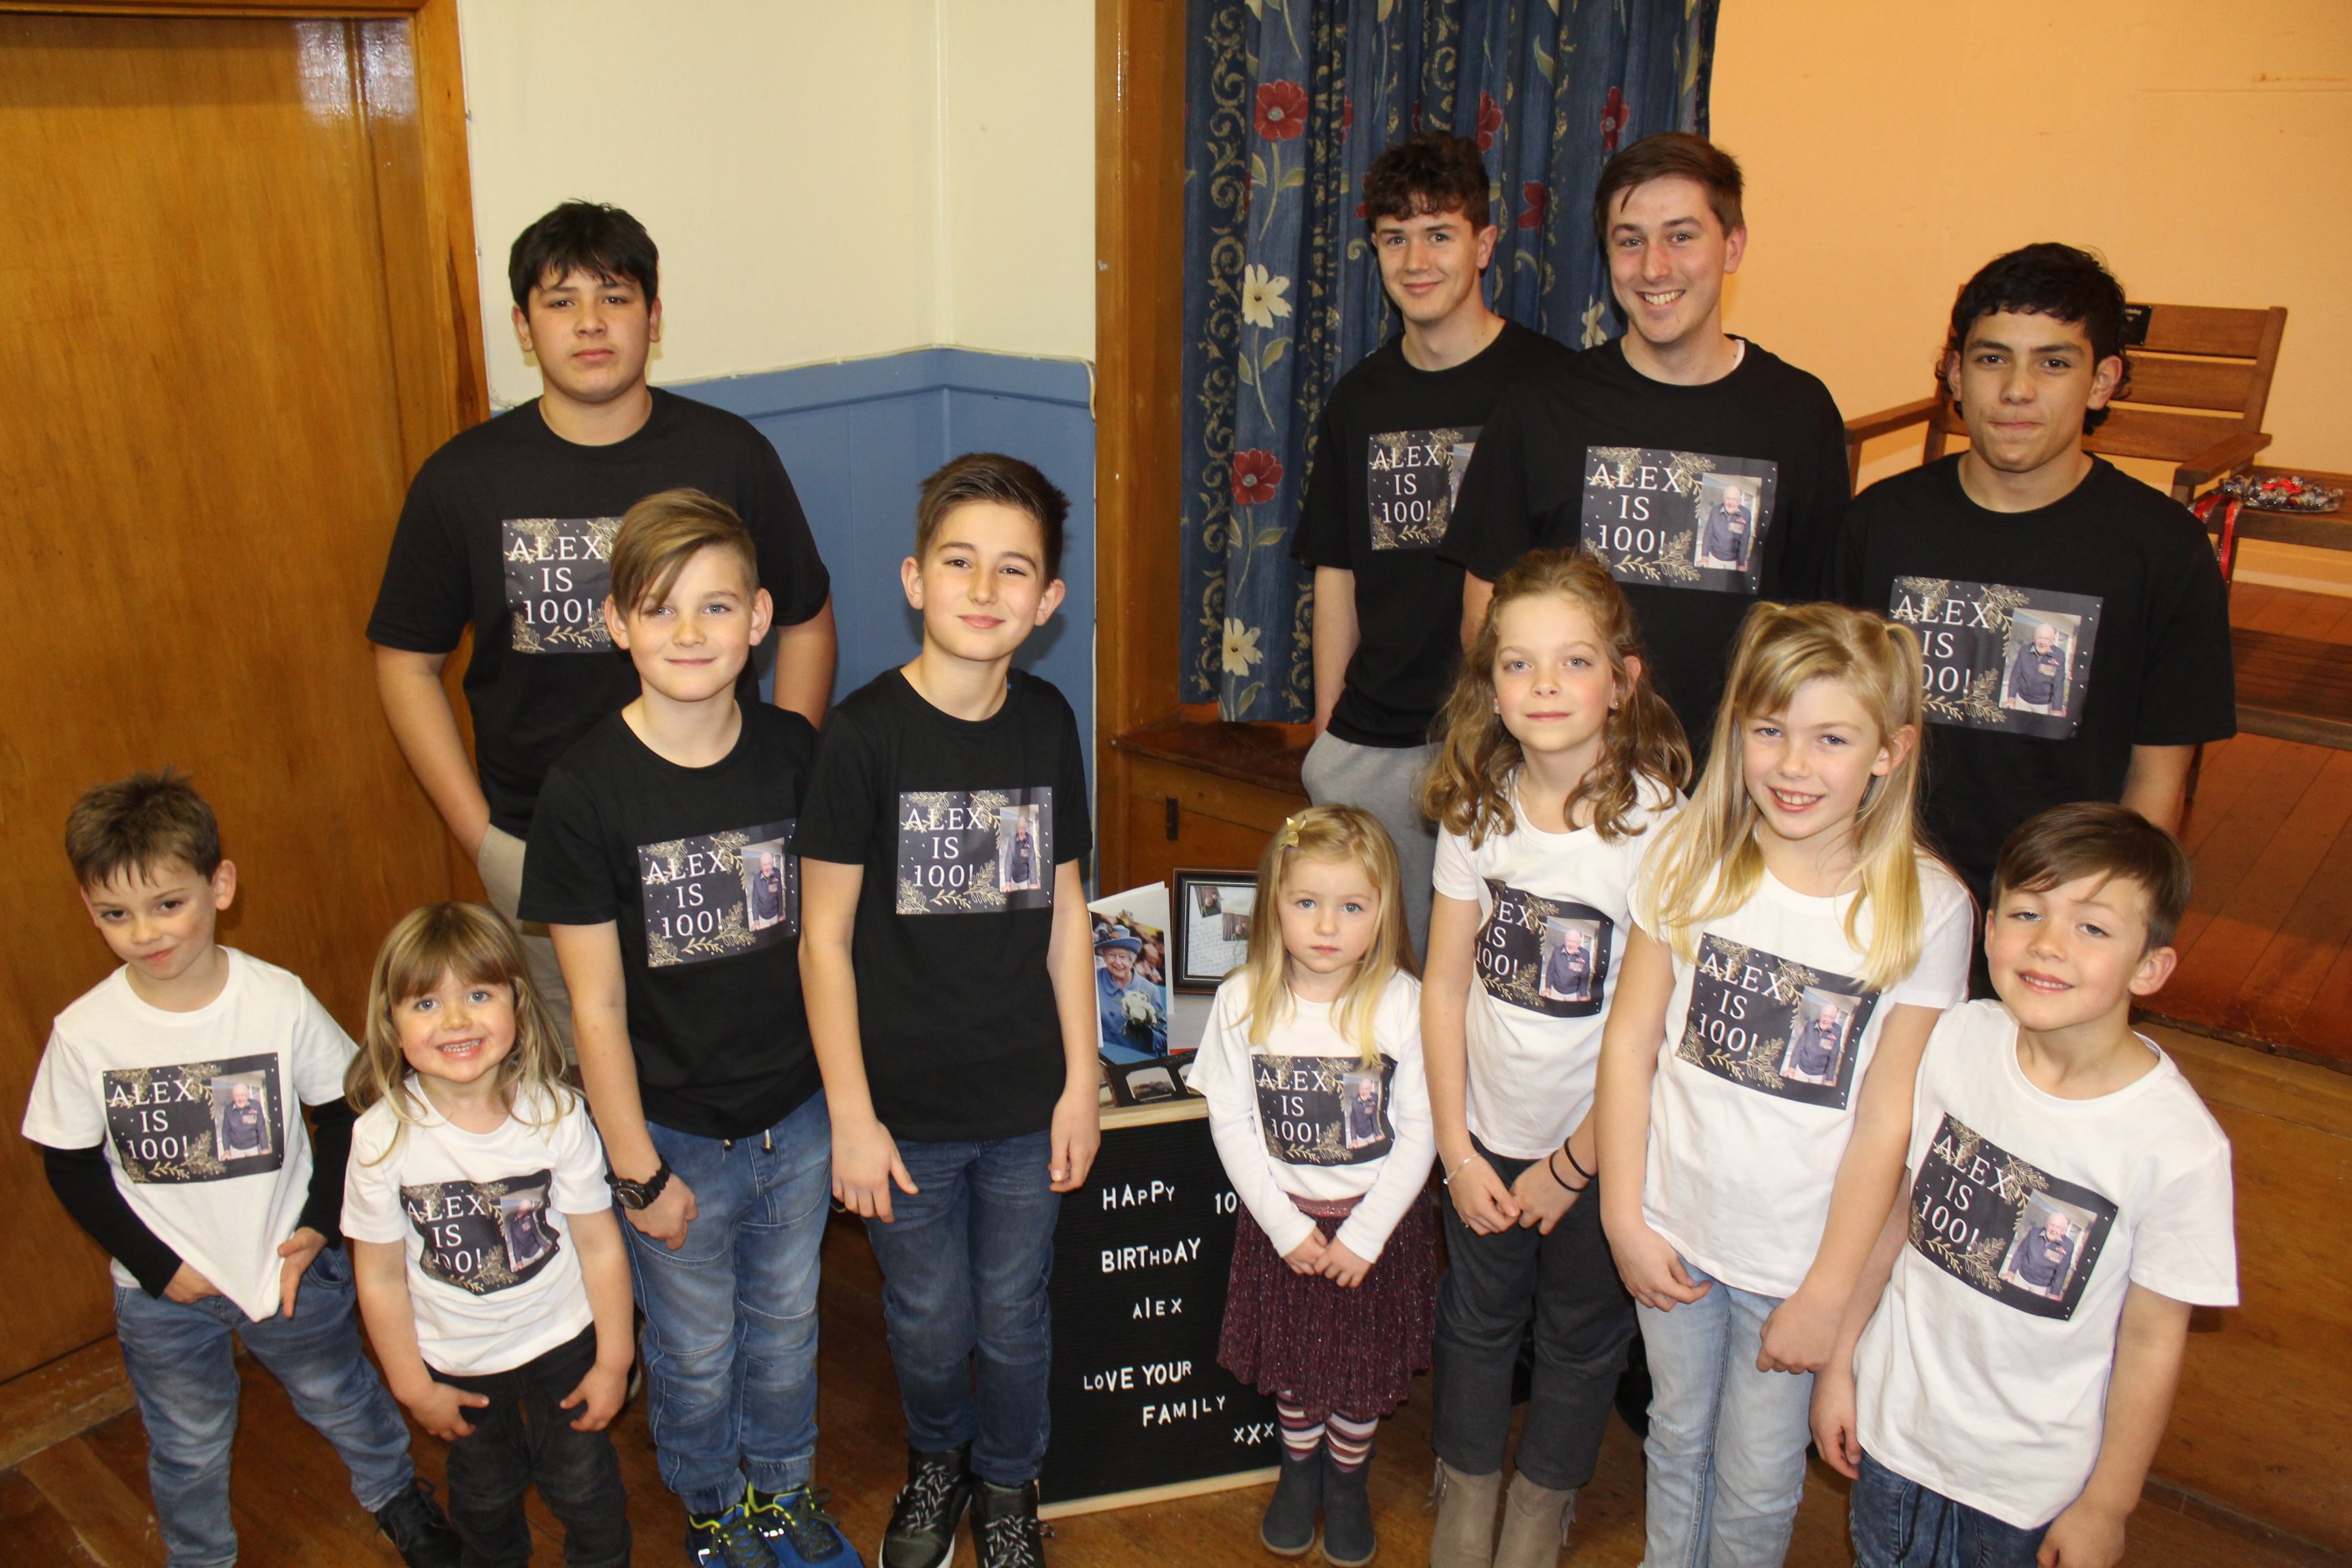 Mr McBurney’s 13 great-grandchildren sported custom-made T-shirts for his party.